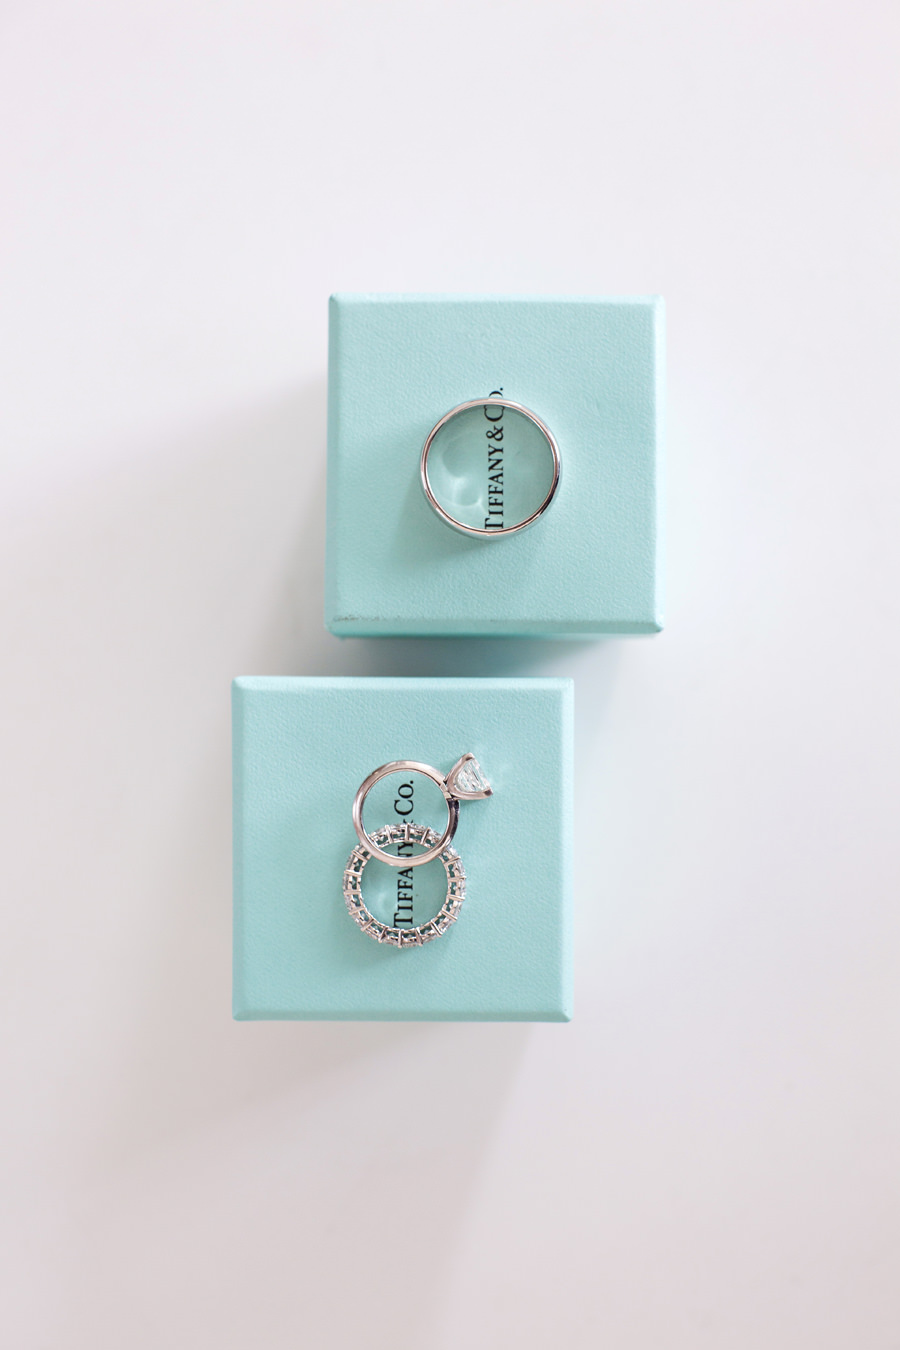 Tiffany & Co. Wedding Engagement Rings and Band